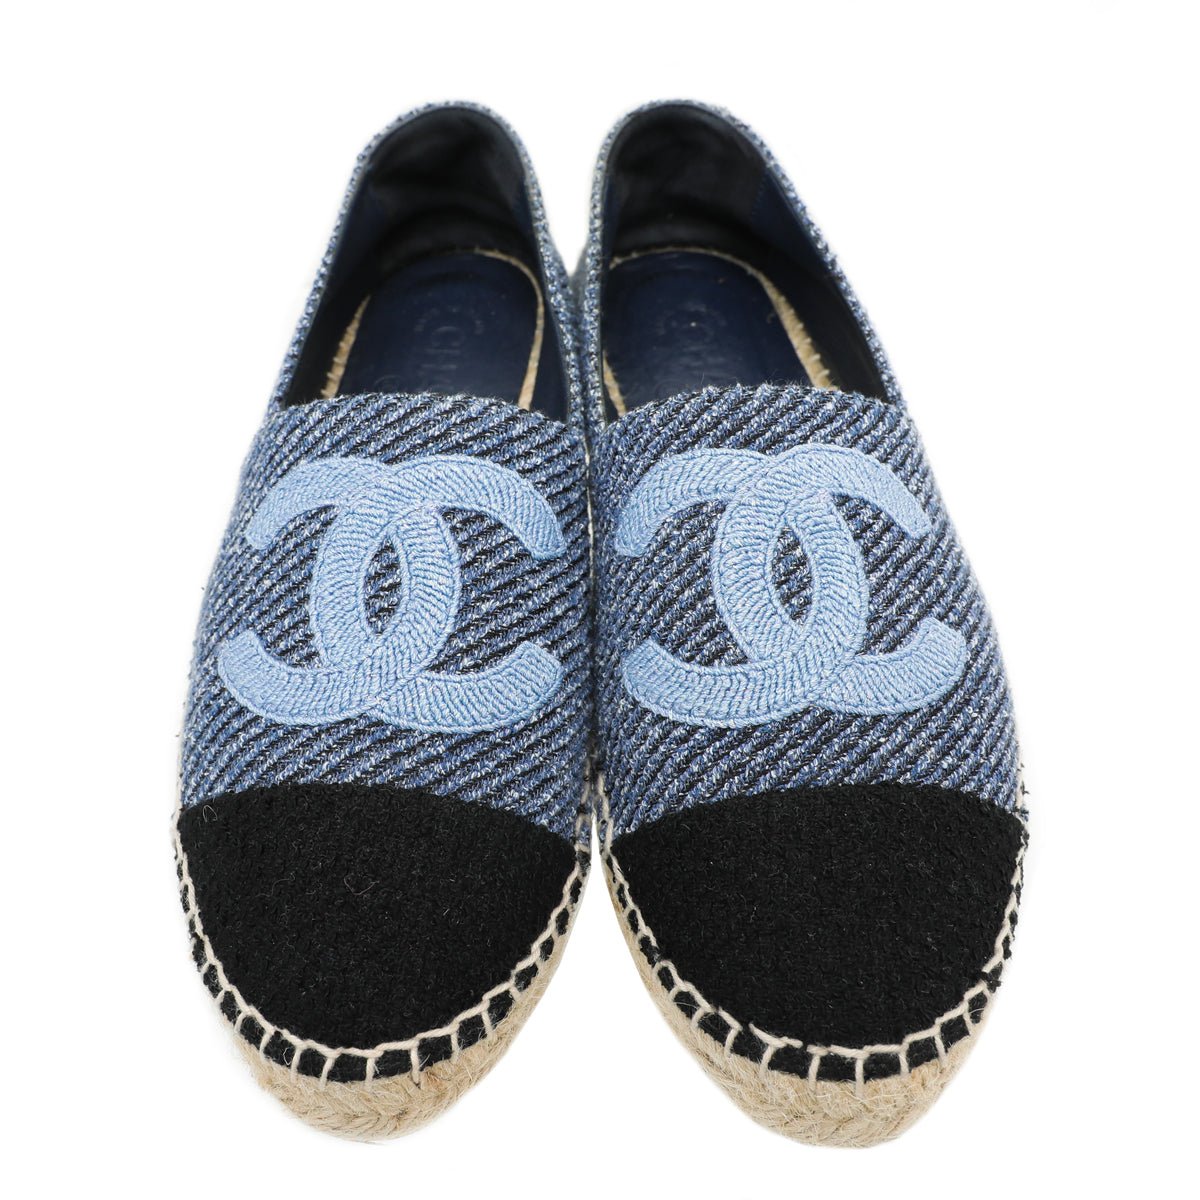 The Closet - Chanel Bicolor Tweed CC Embroidered Espadrille 39 | The Closet